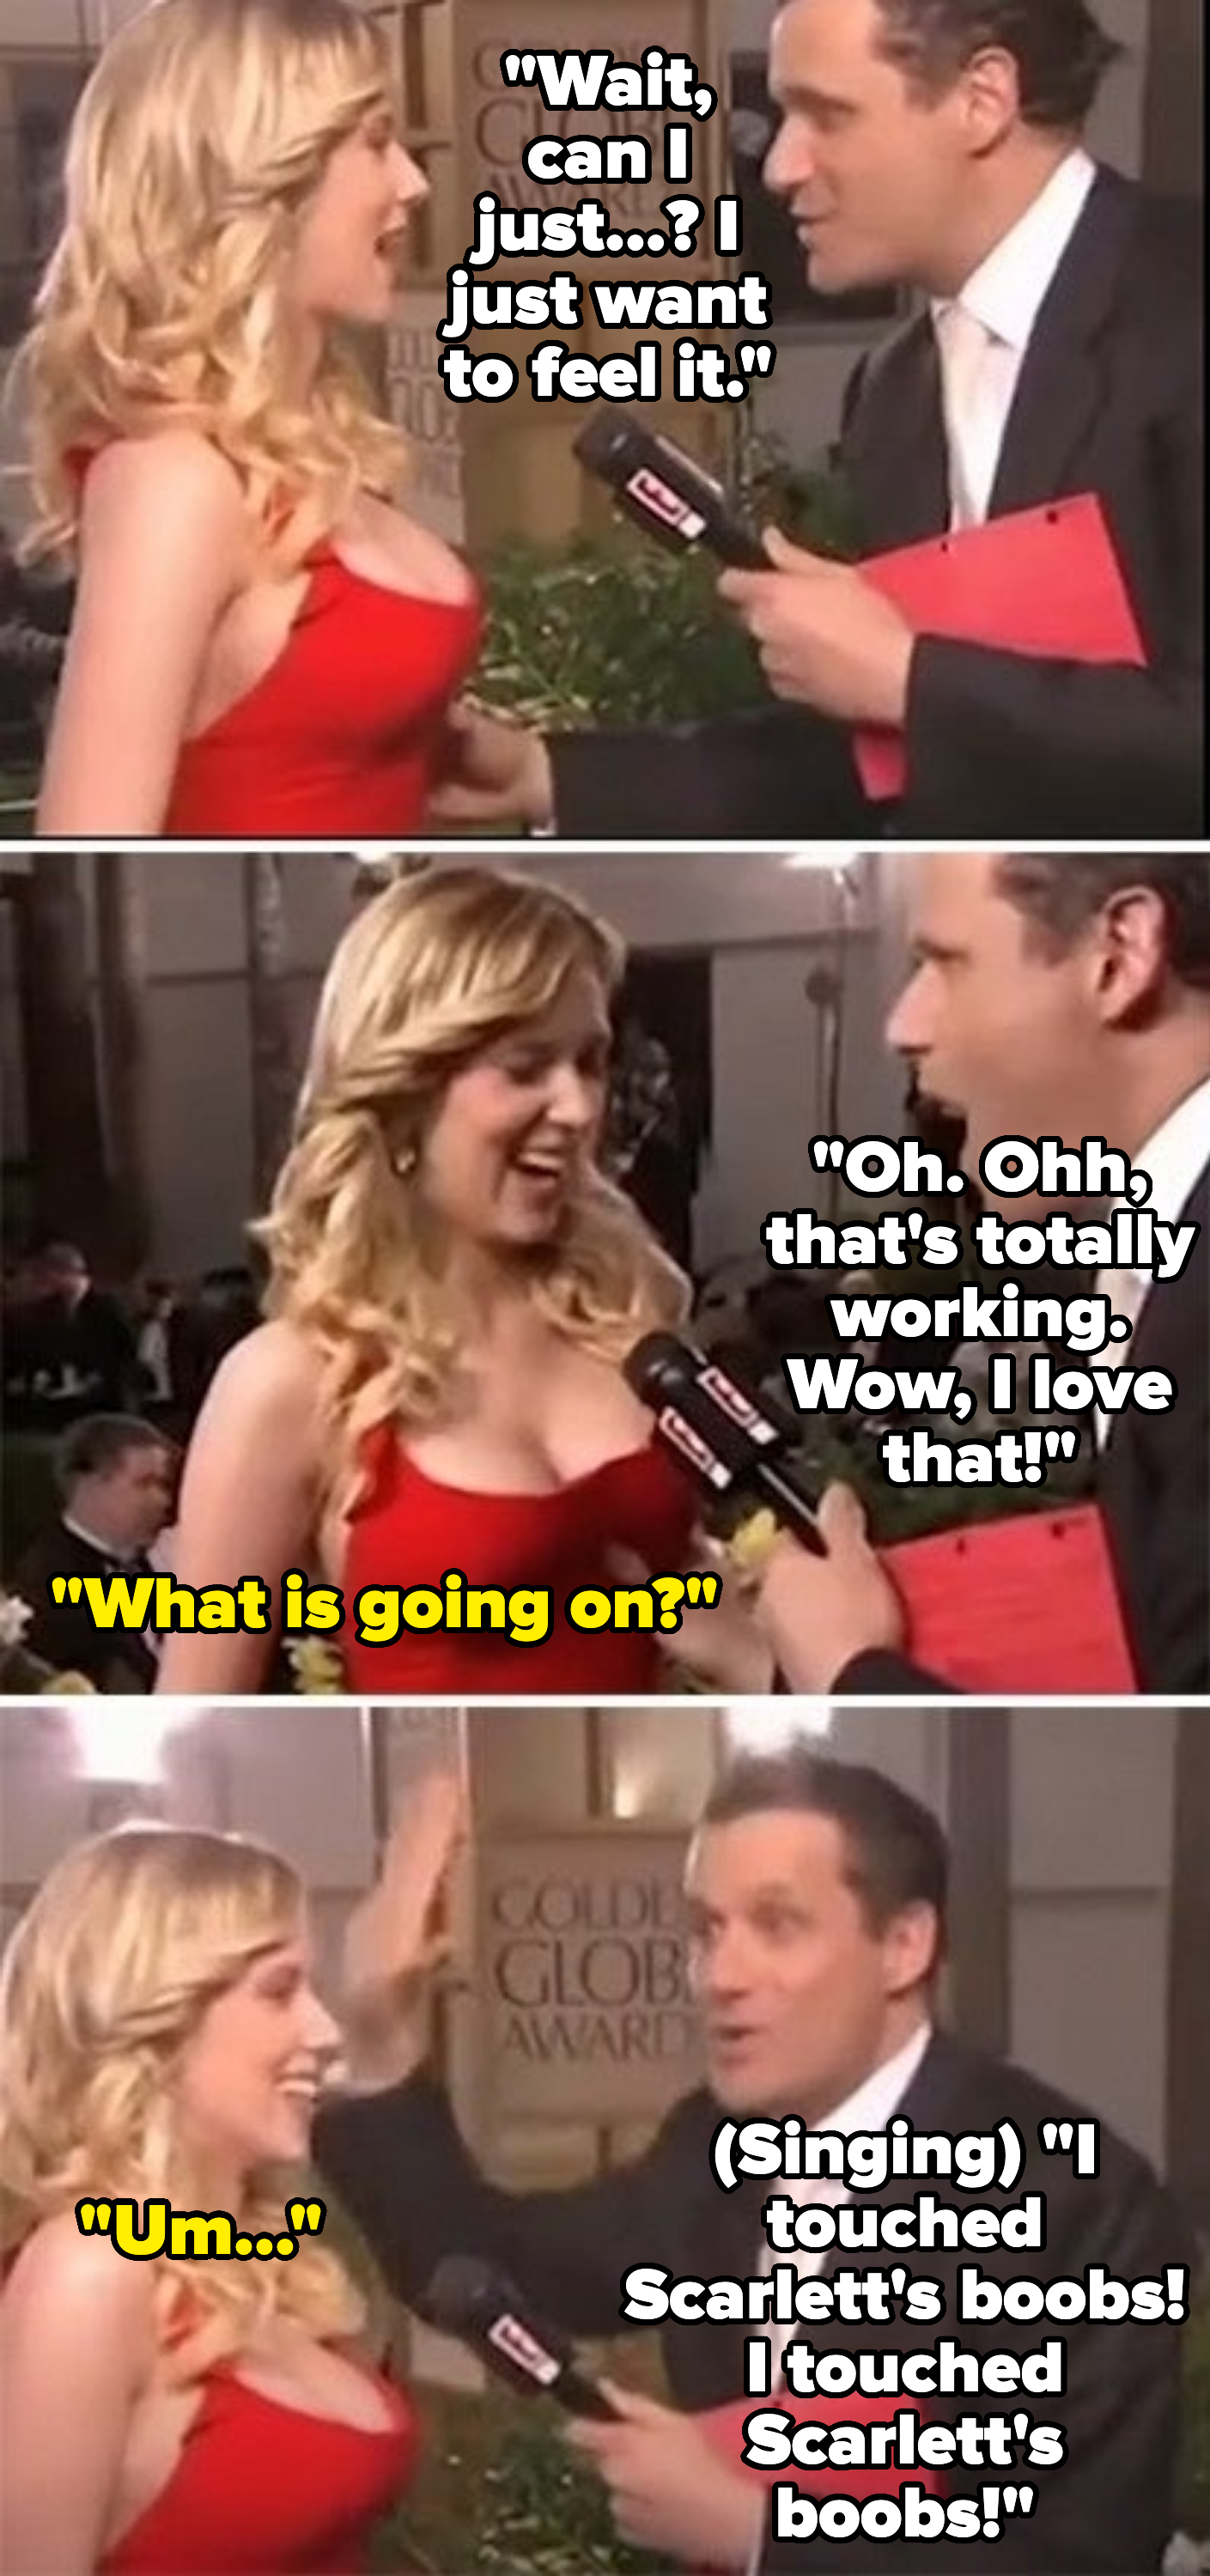 Scarlett Johansson in a red dress being interviewed at the Golden Globes